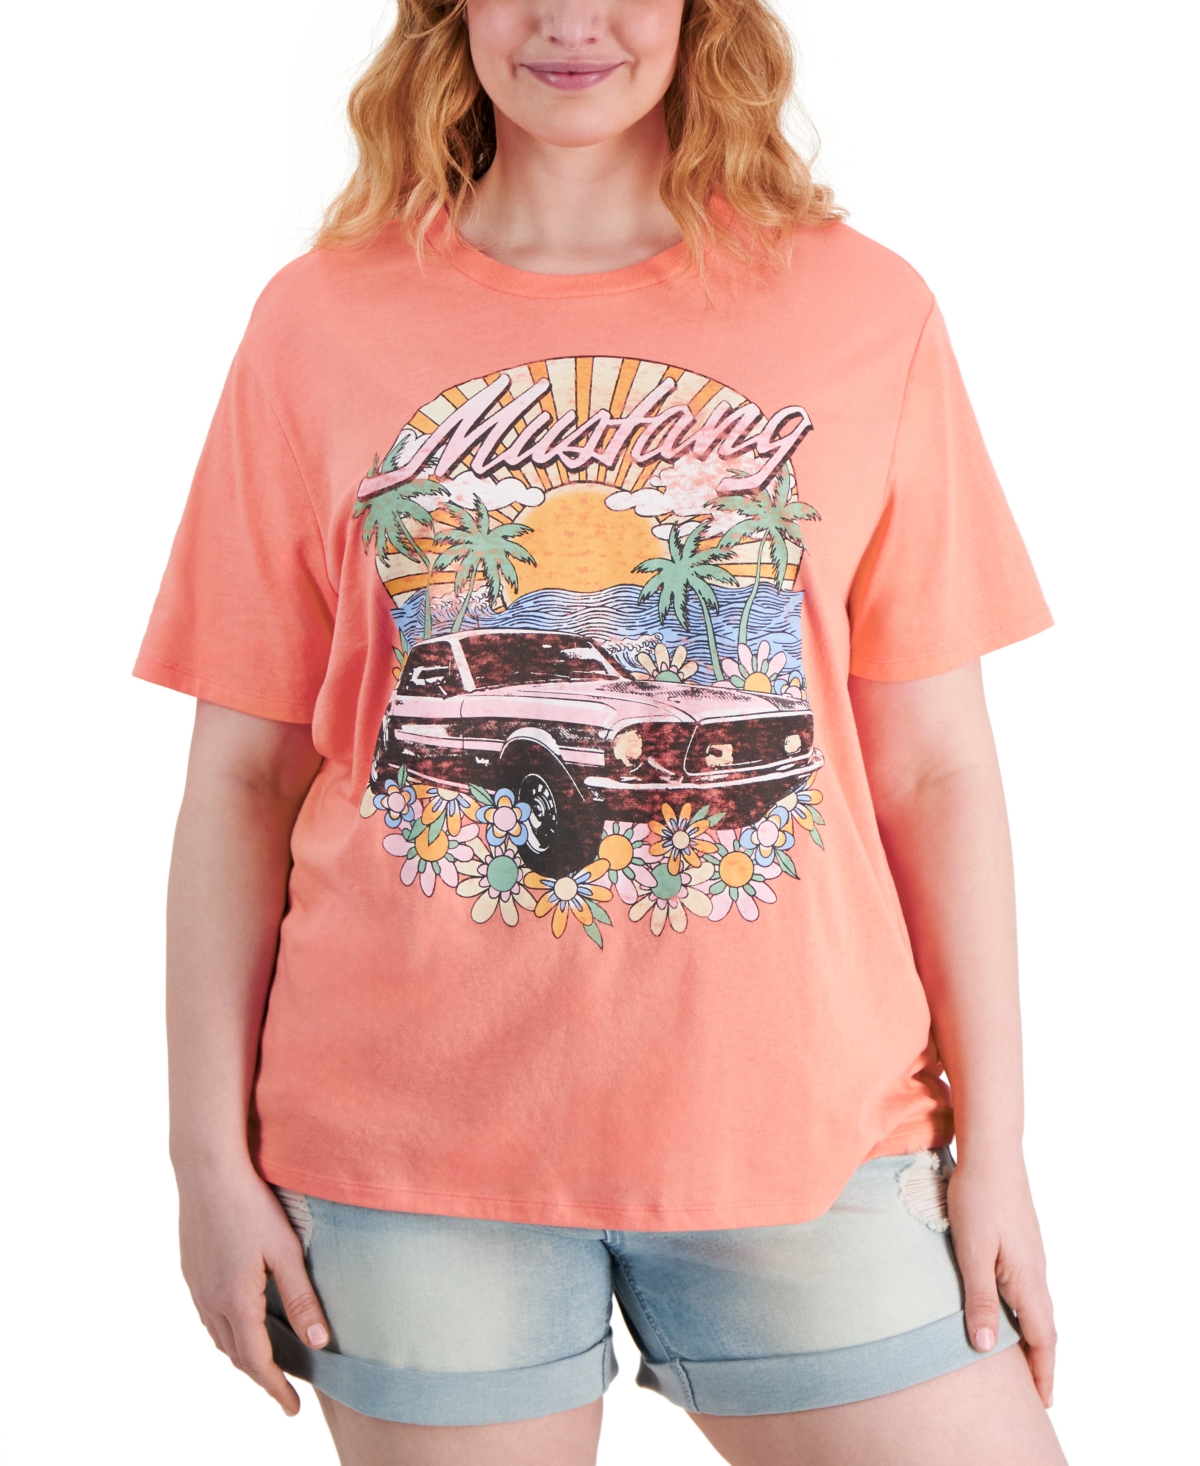 Plus Size Short-Sleeve Mustang Graphic T-Shirt - Calypso Coral